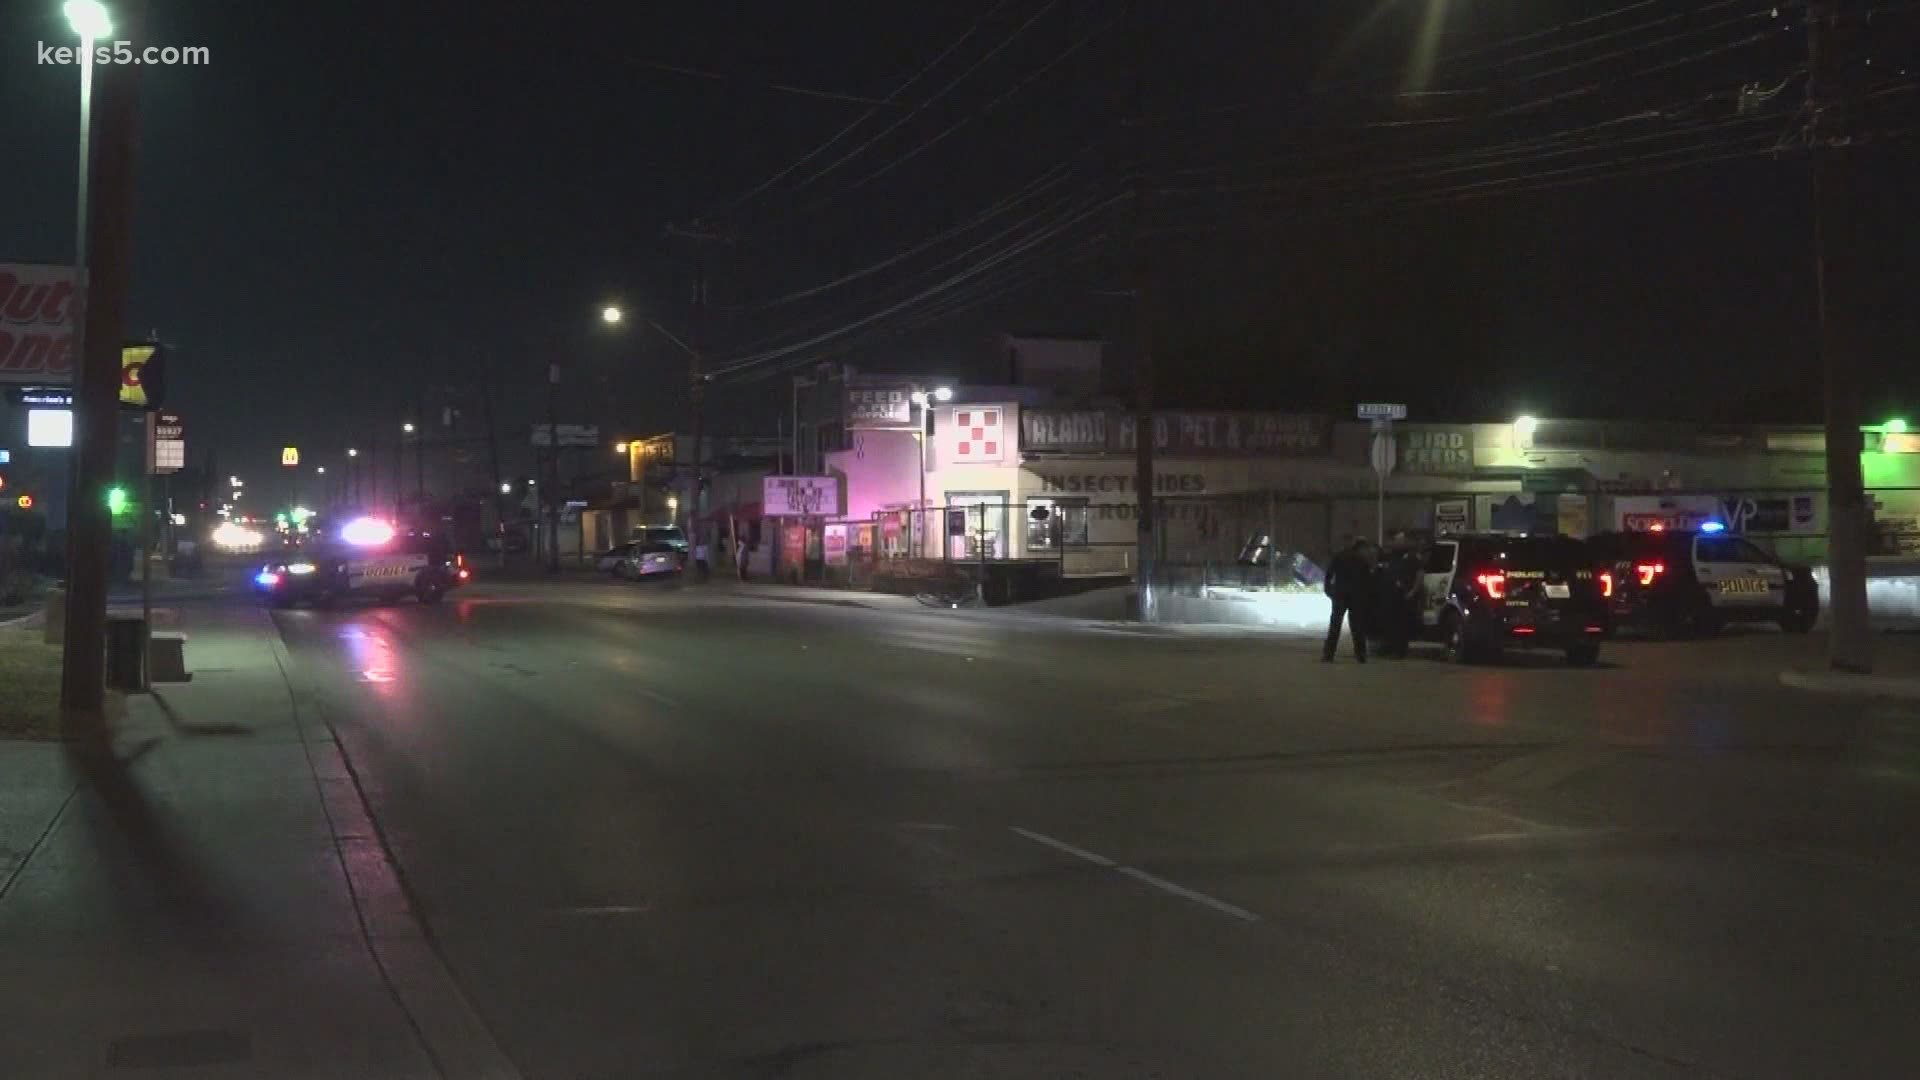 San Antonio Police are looking for the driver who hit a man overnight and kept going.